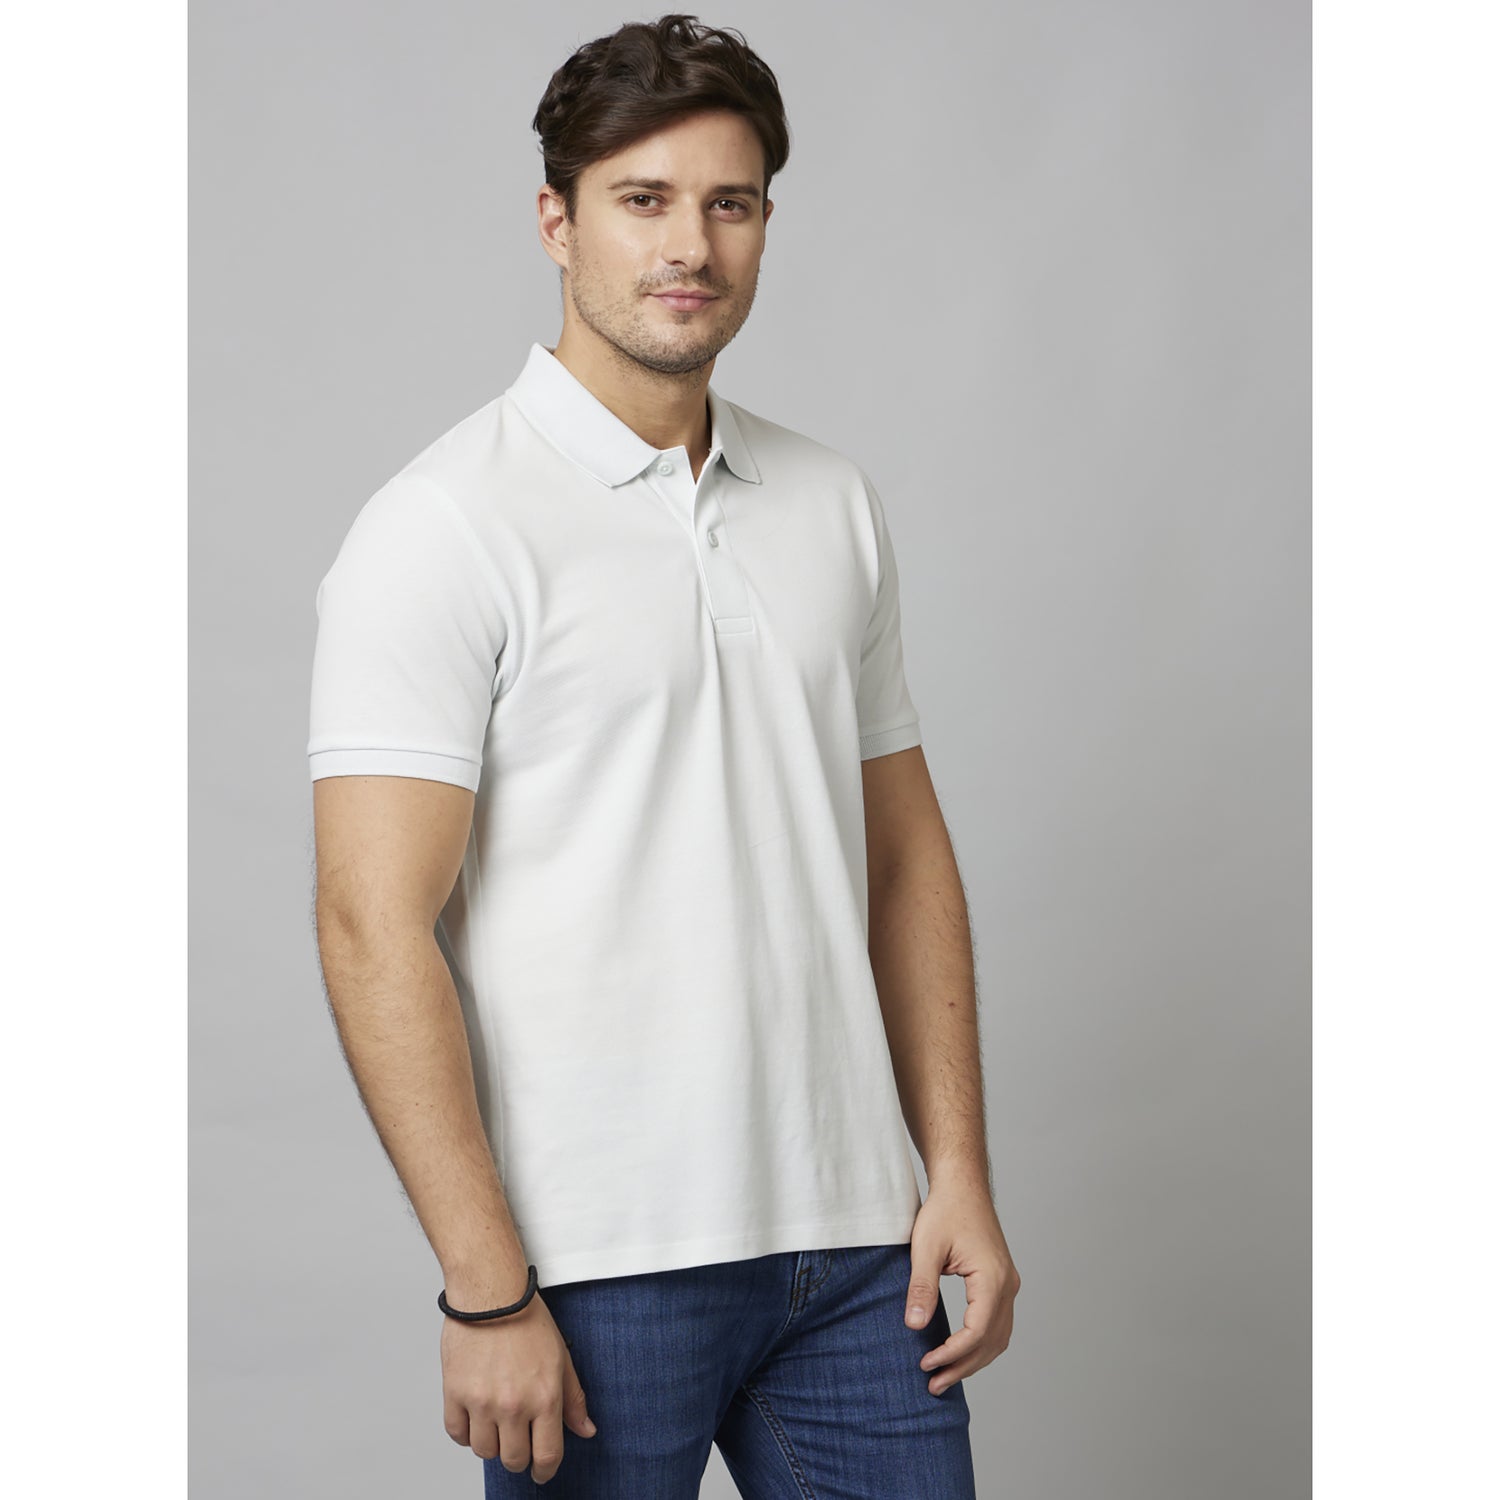 Light Blue Solid Half Sleeve Cotton T-Shirts (TEONE2)